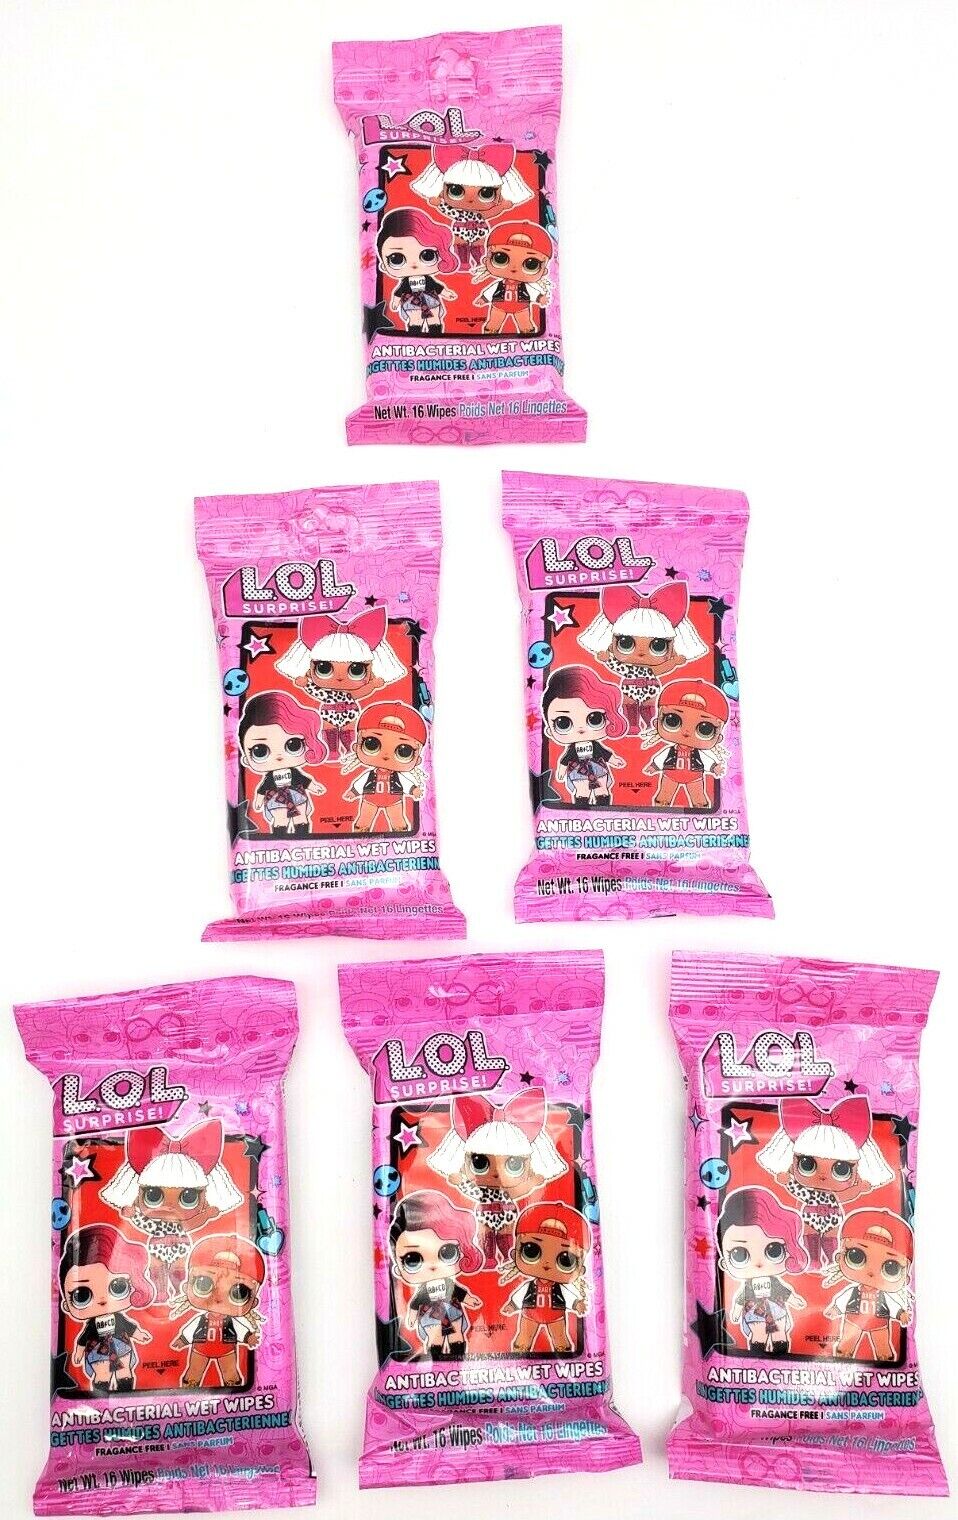 LOT OF 6 (16 per pack): LOL Surprise Dolls WET WIPES Fragrance Free -RESEALABLE! YoYo Lip Gloss Inc 44202